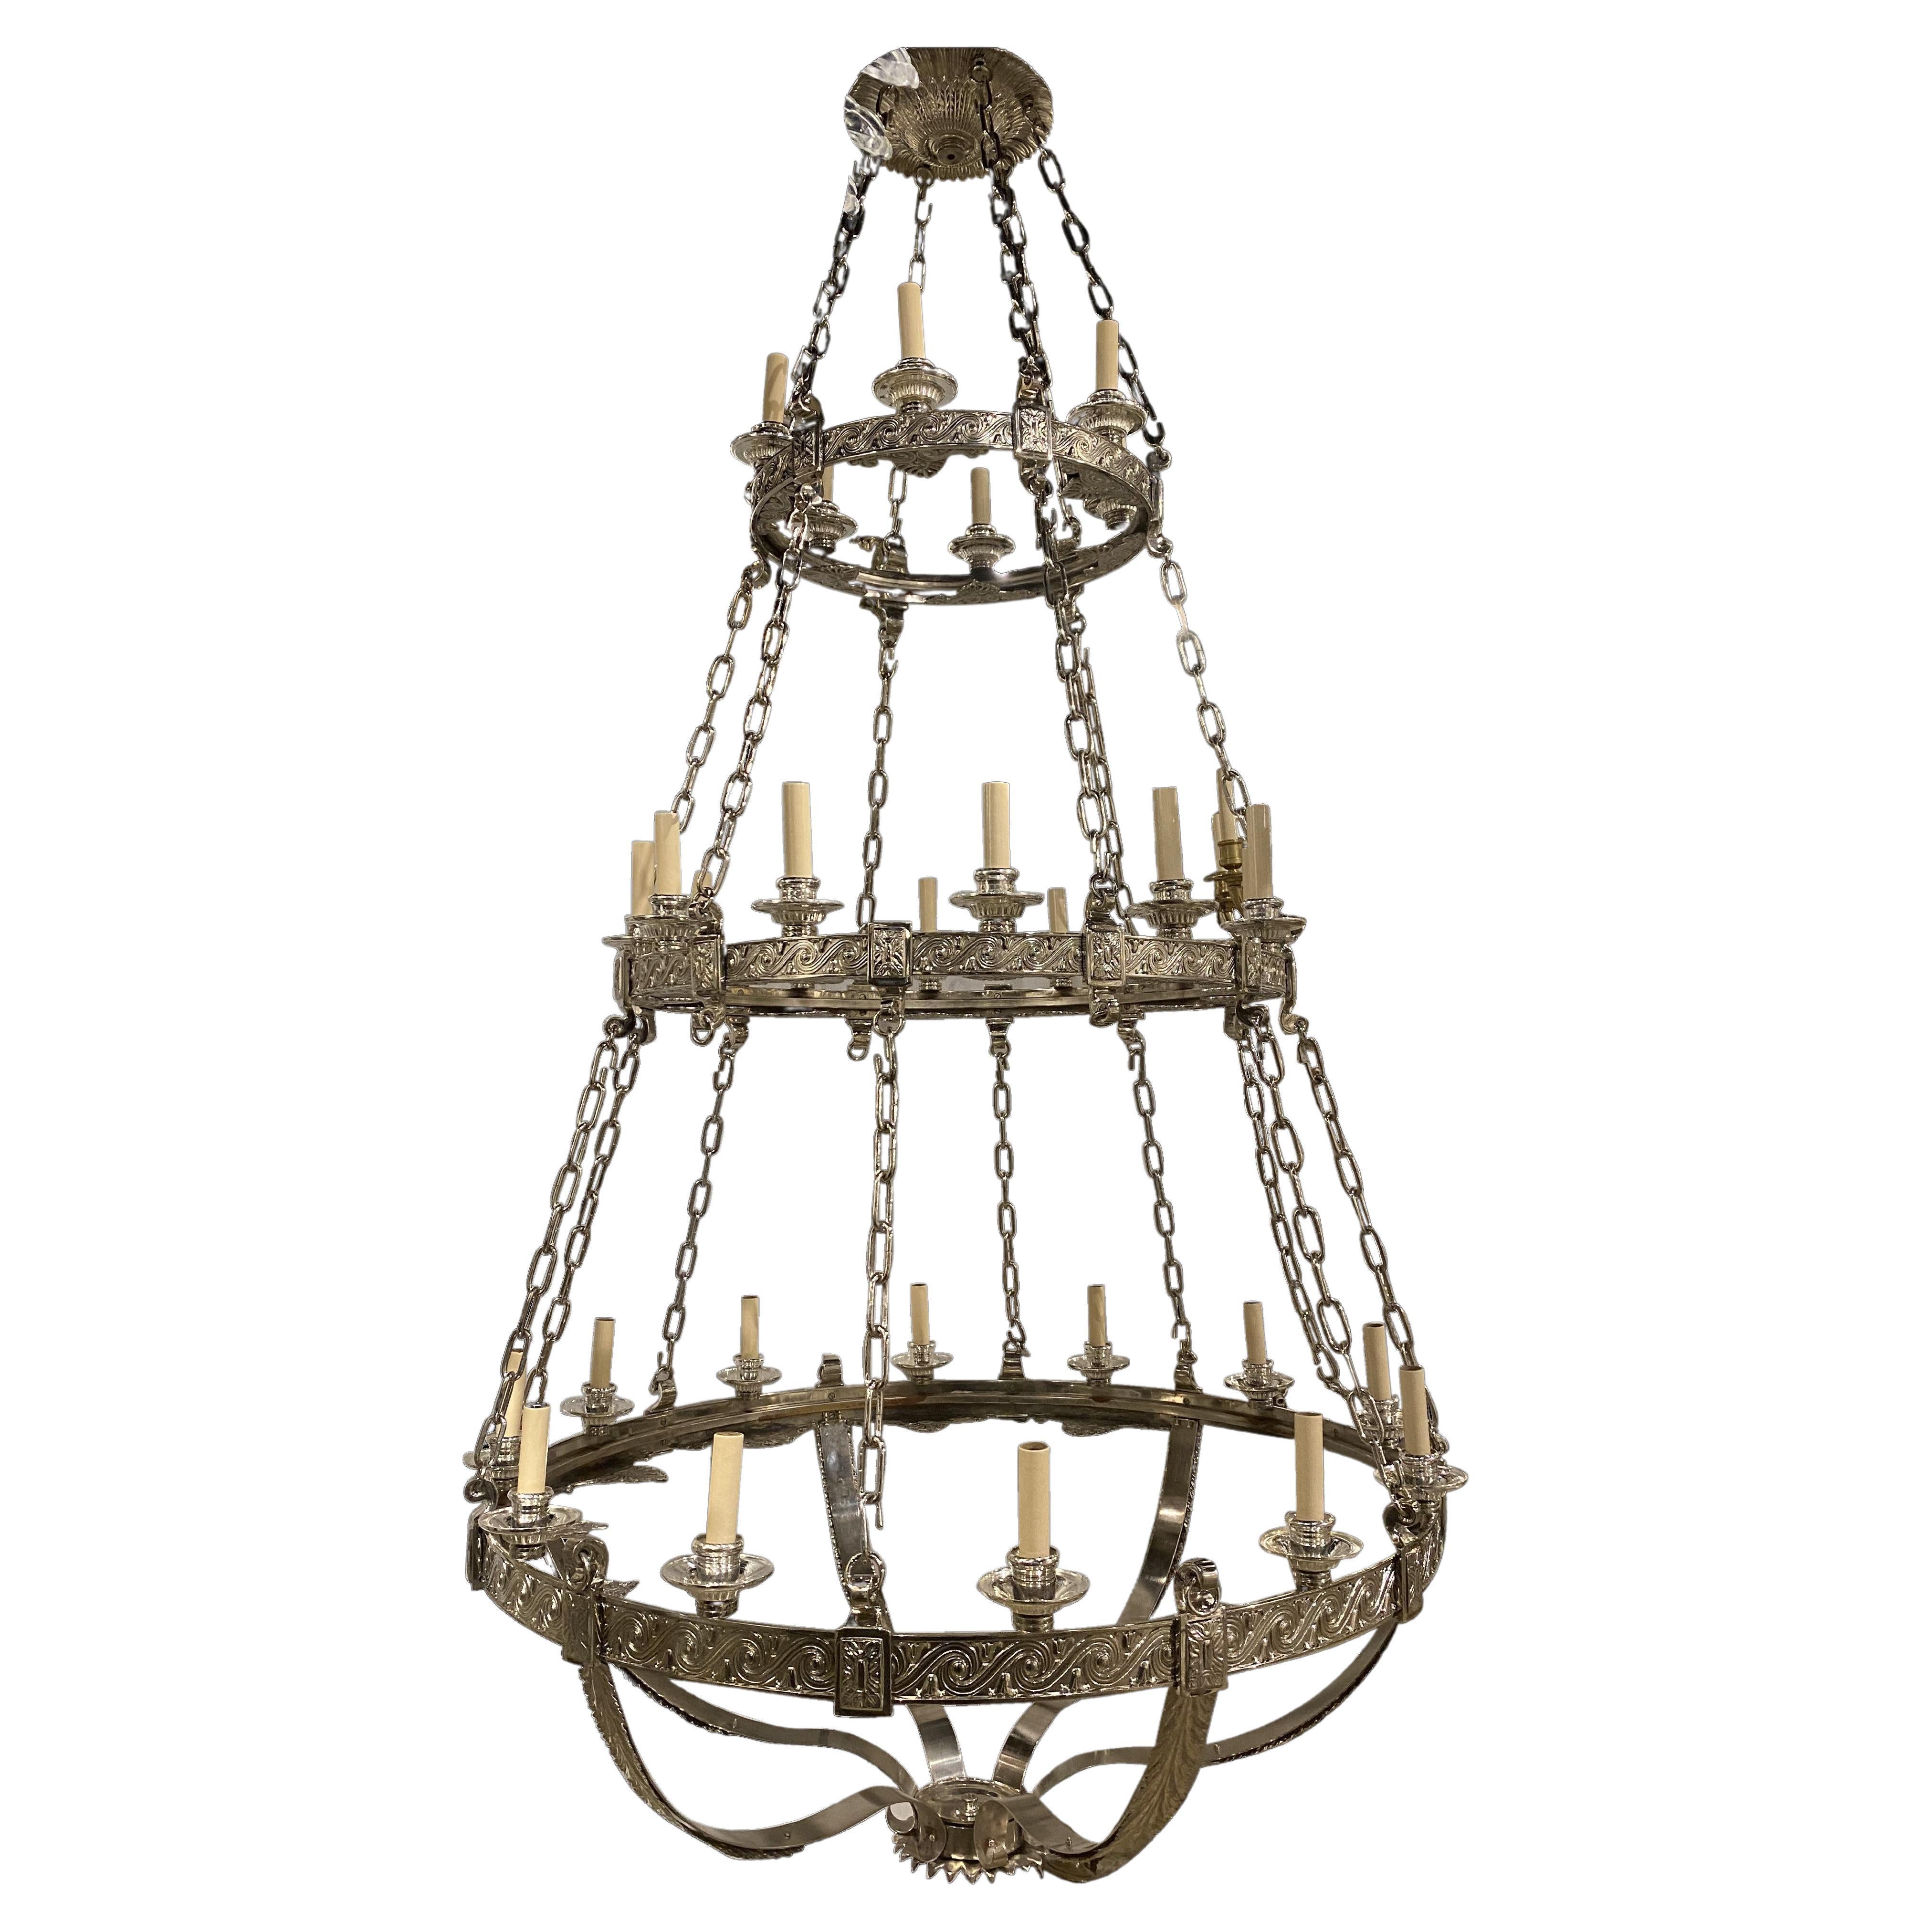 1900's Large Neoclassic Silver Plated Chandelier